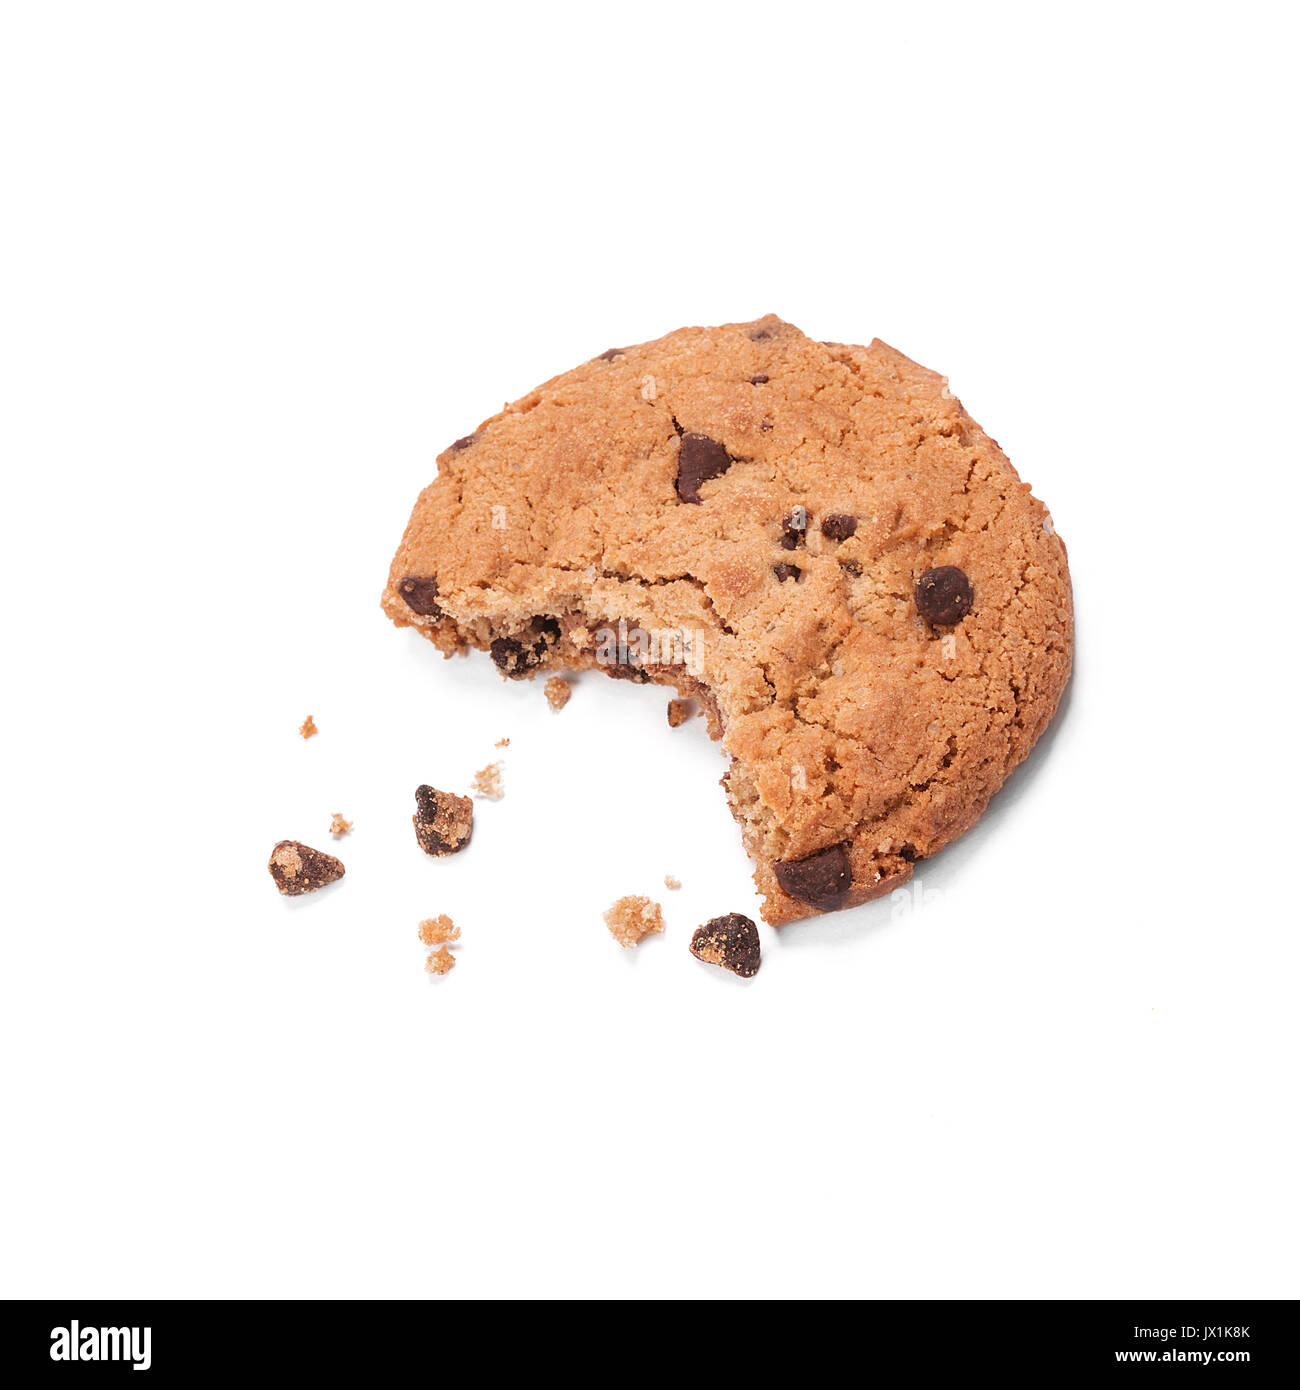 Single round chocolate chip biscuit with crumbs and bite missing, isolated on white from above. Stock Photo